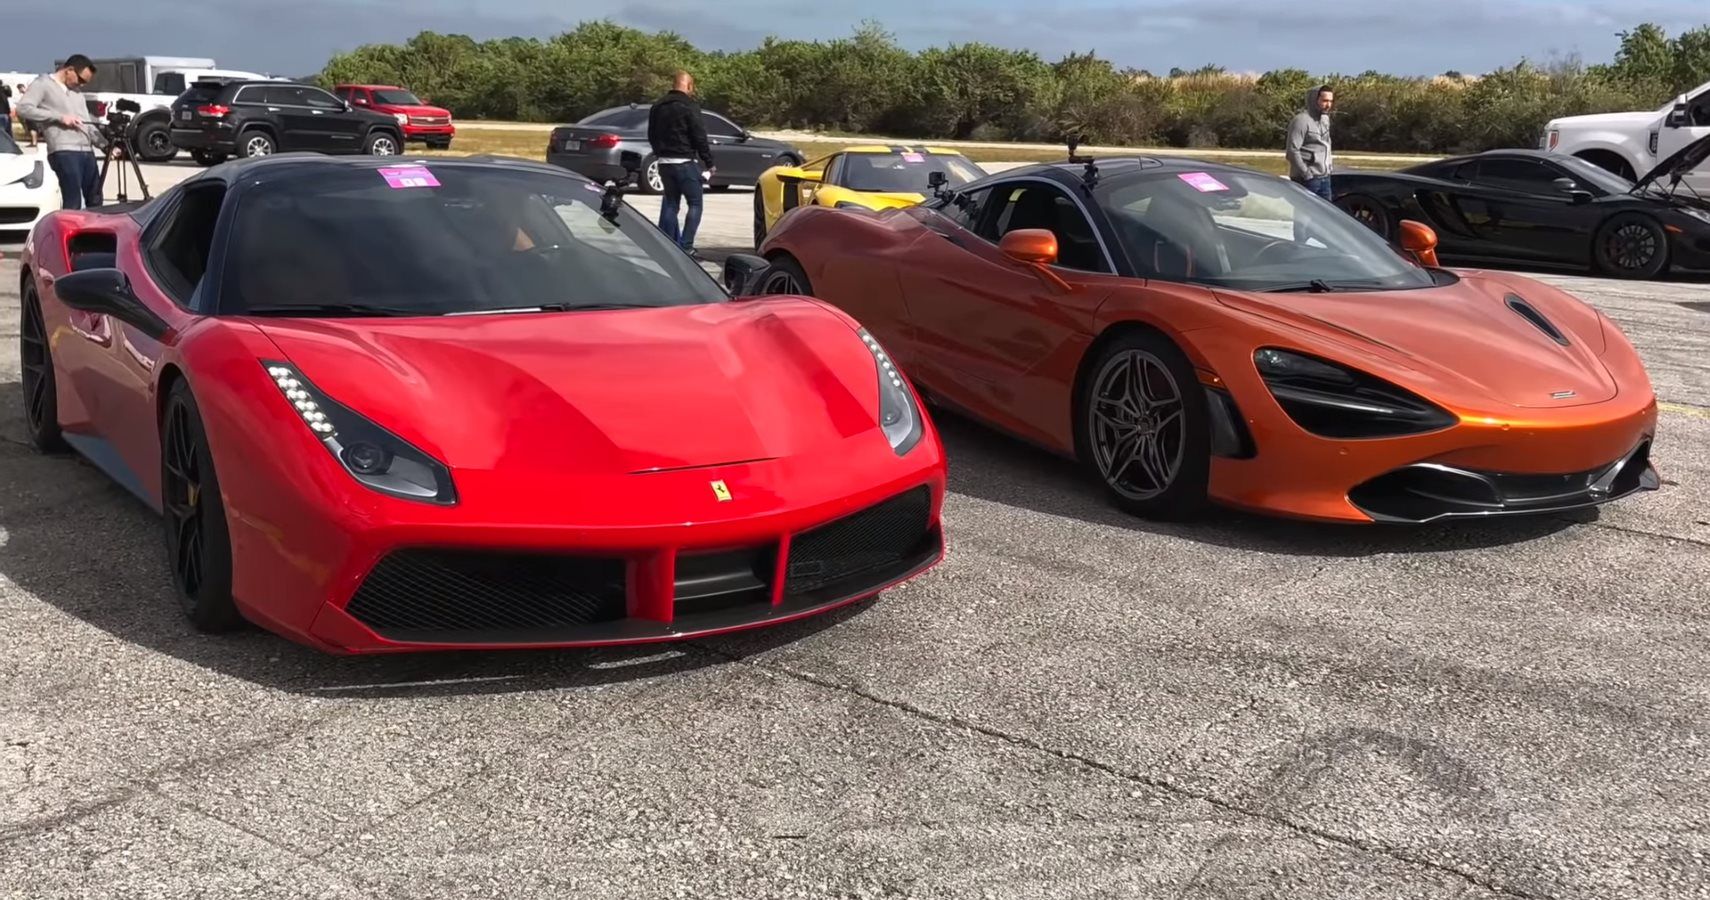 Check Out A Half-Mile Drag Race Between A Ferrari 488 And A McLaren 720S